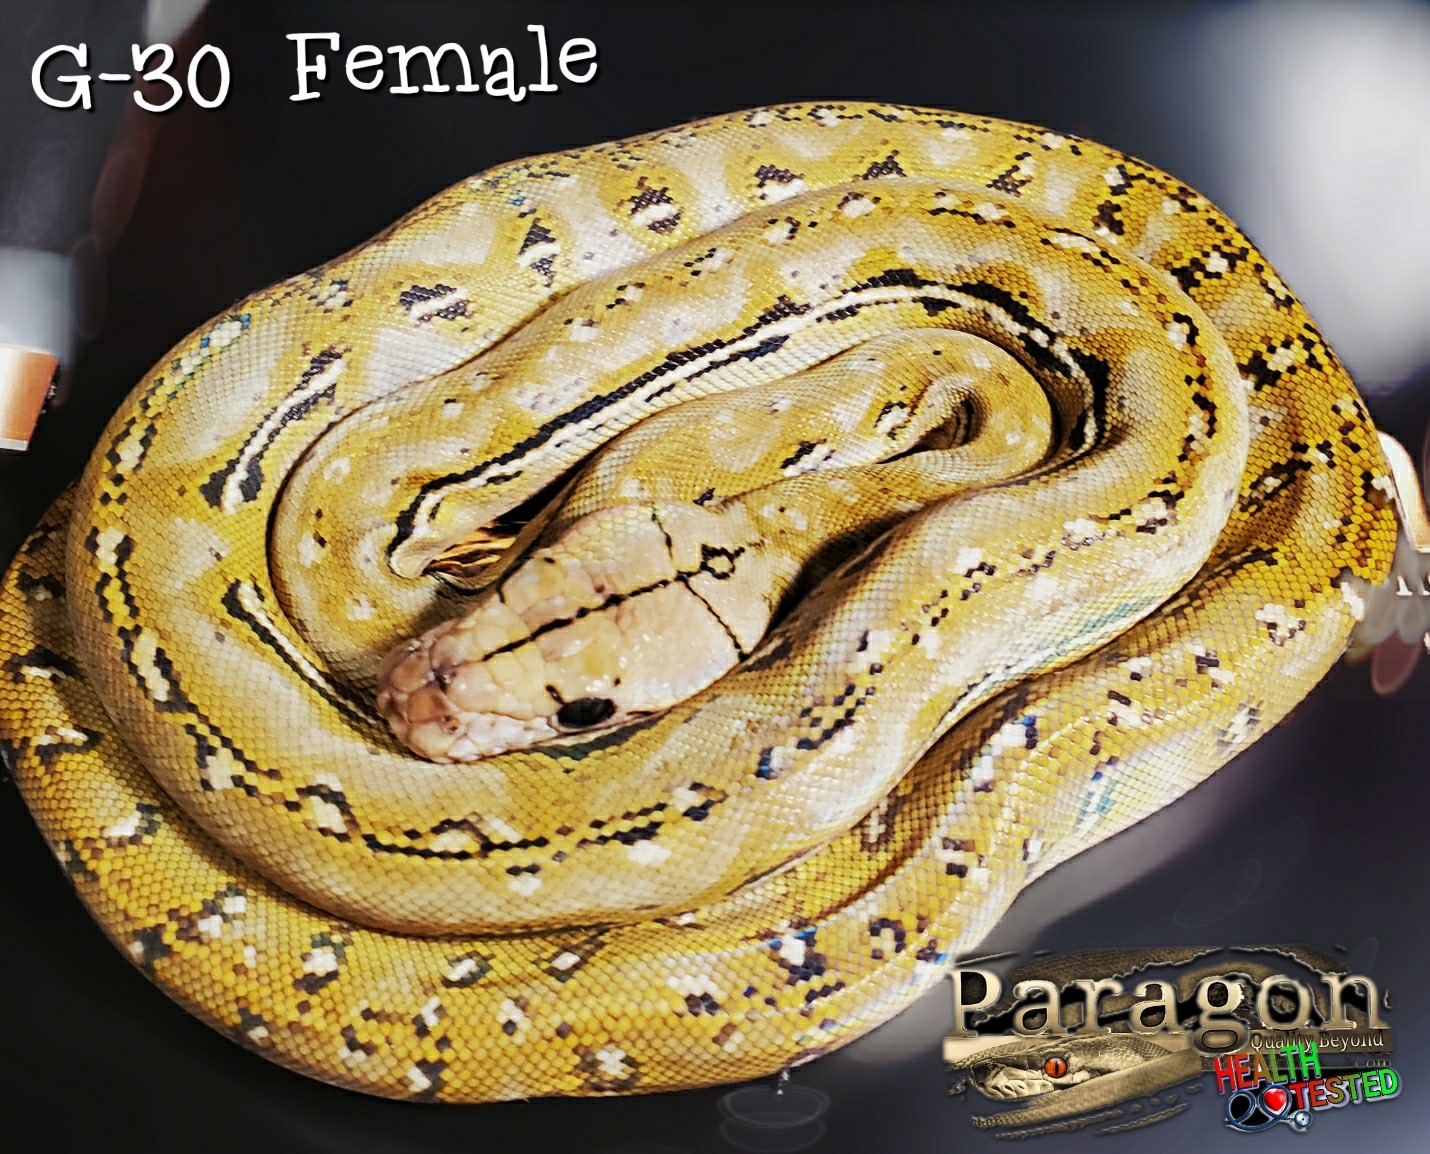 Anthrax Reticulated Python by Paragon Exotics